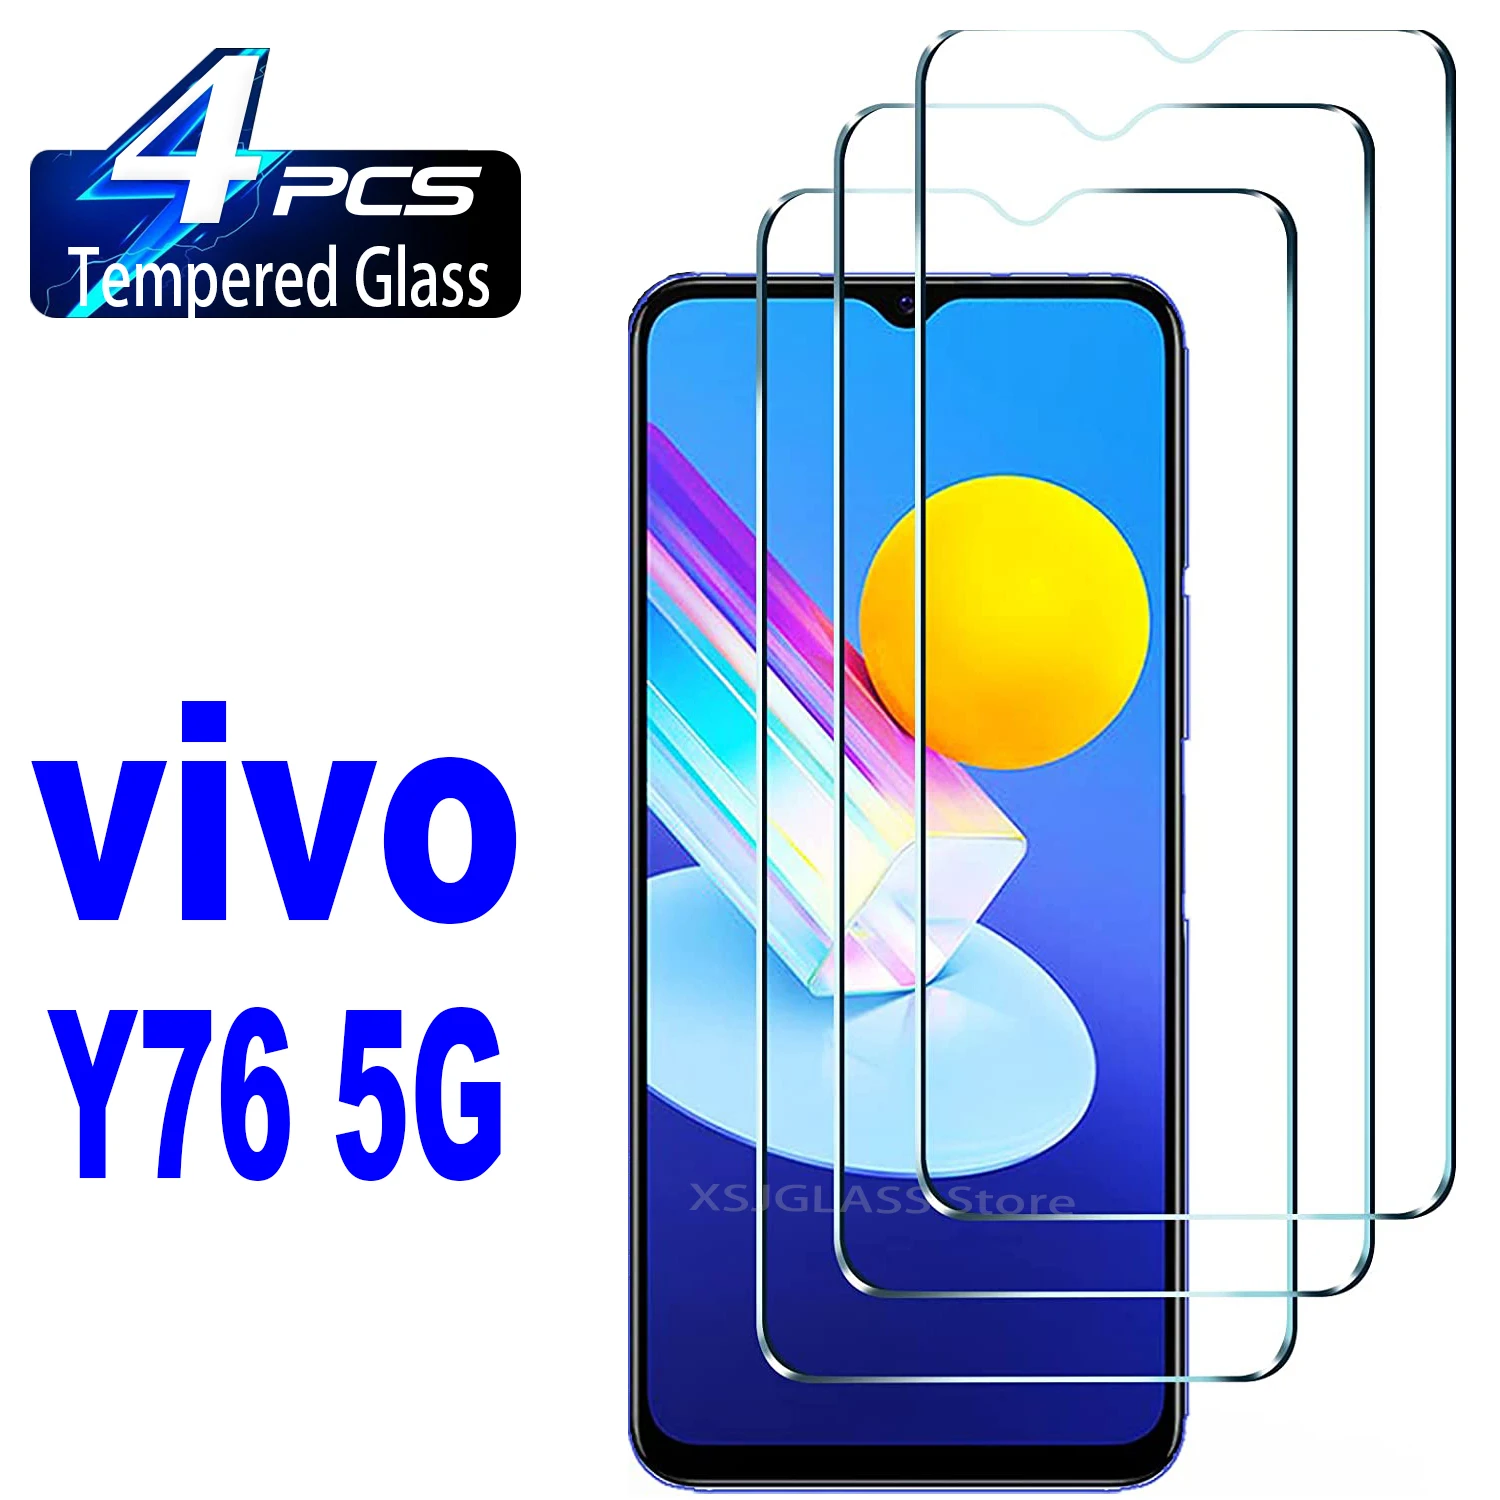 2-4pcs-tempered-glass-for-vivo-y76-5g-screen-protector-glass-film